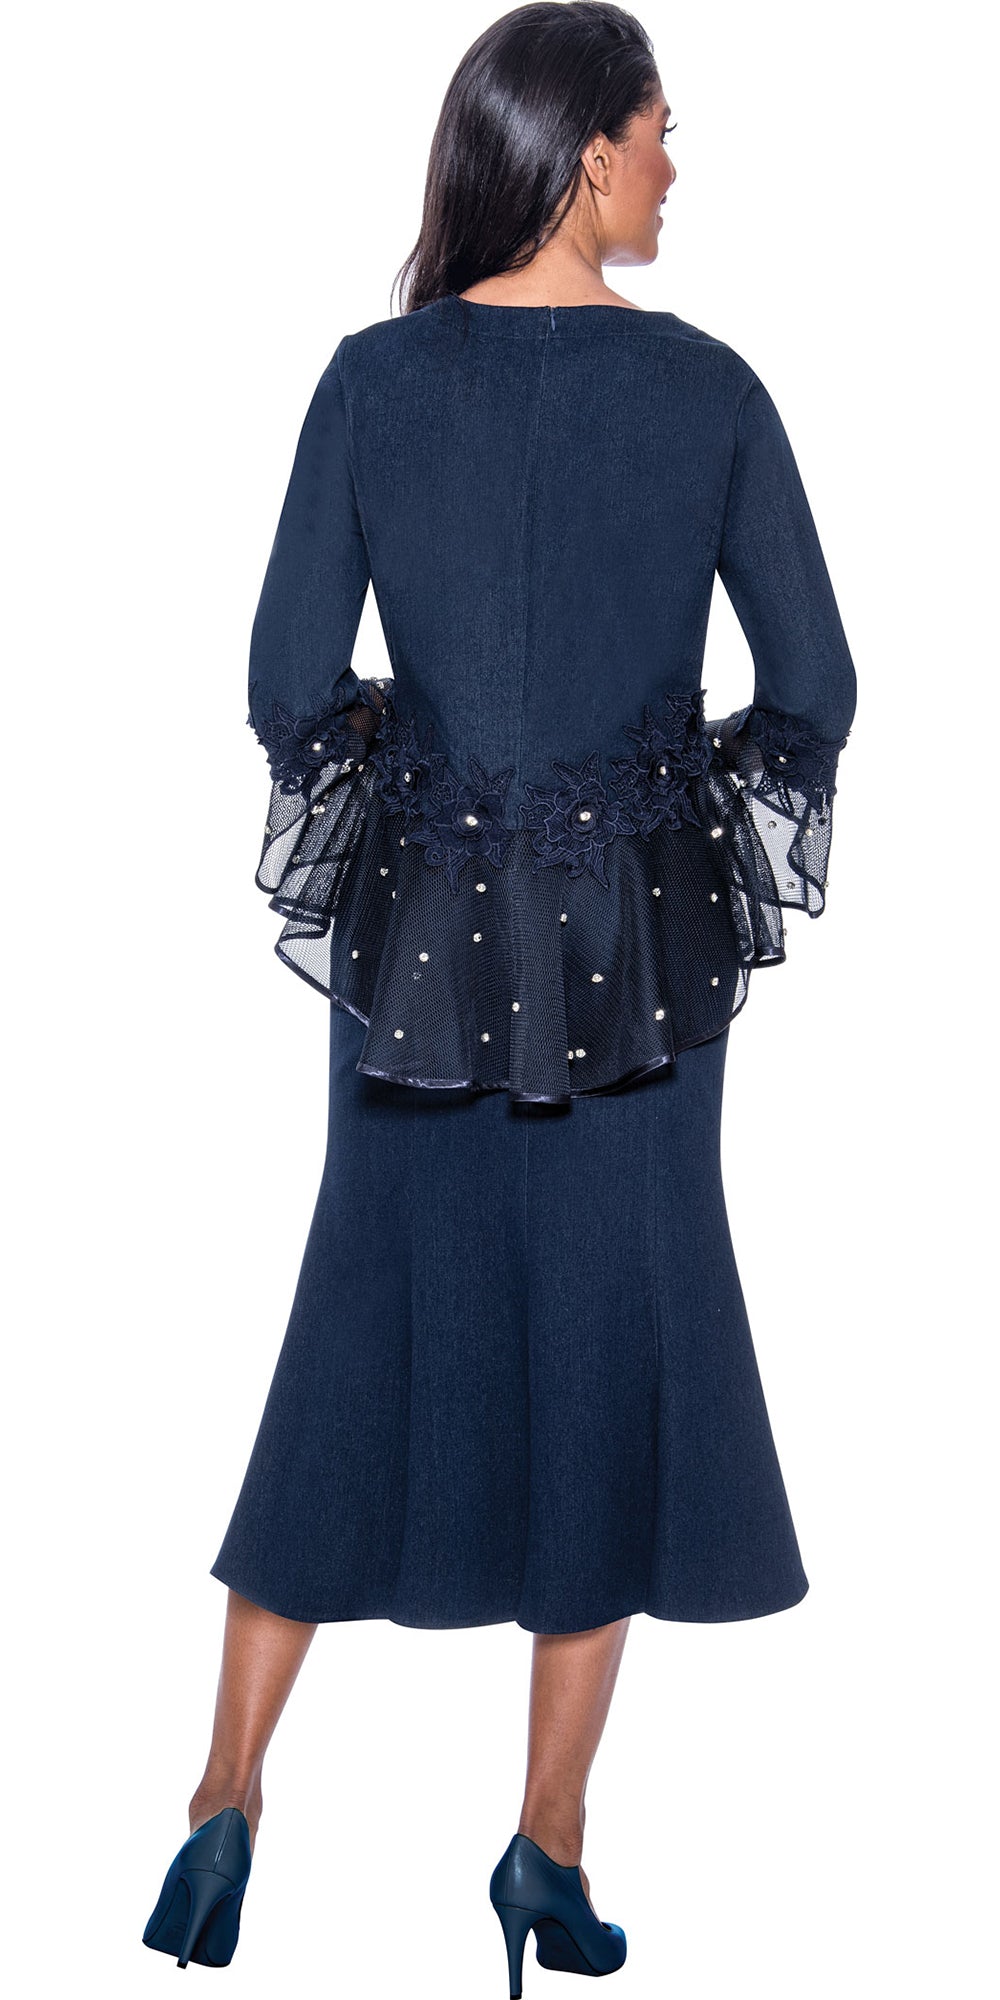 Devine Sport 63992 - Navy - Embellished Denim Skirt Suit With Sheer Cuffs and Peplum